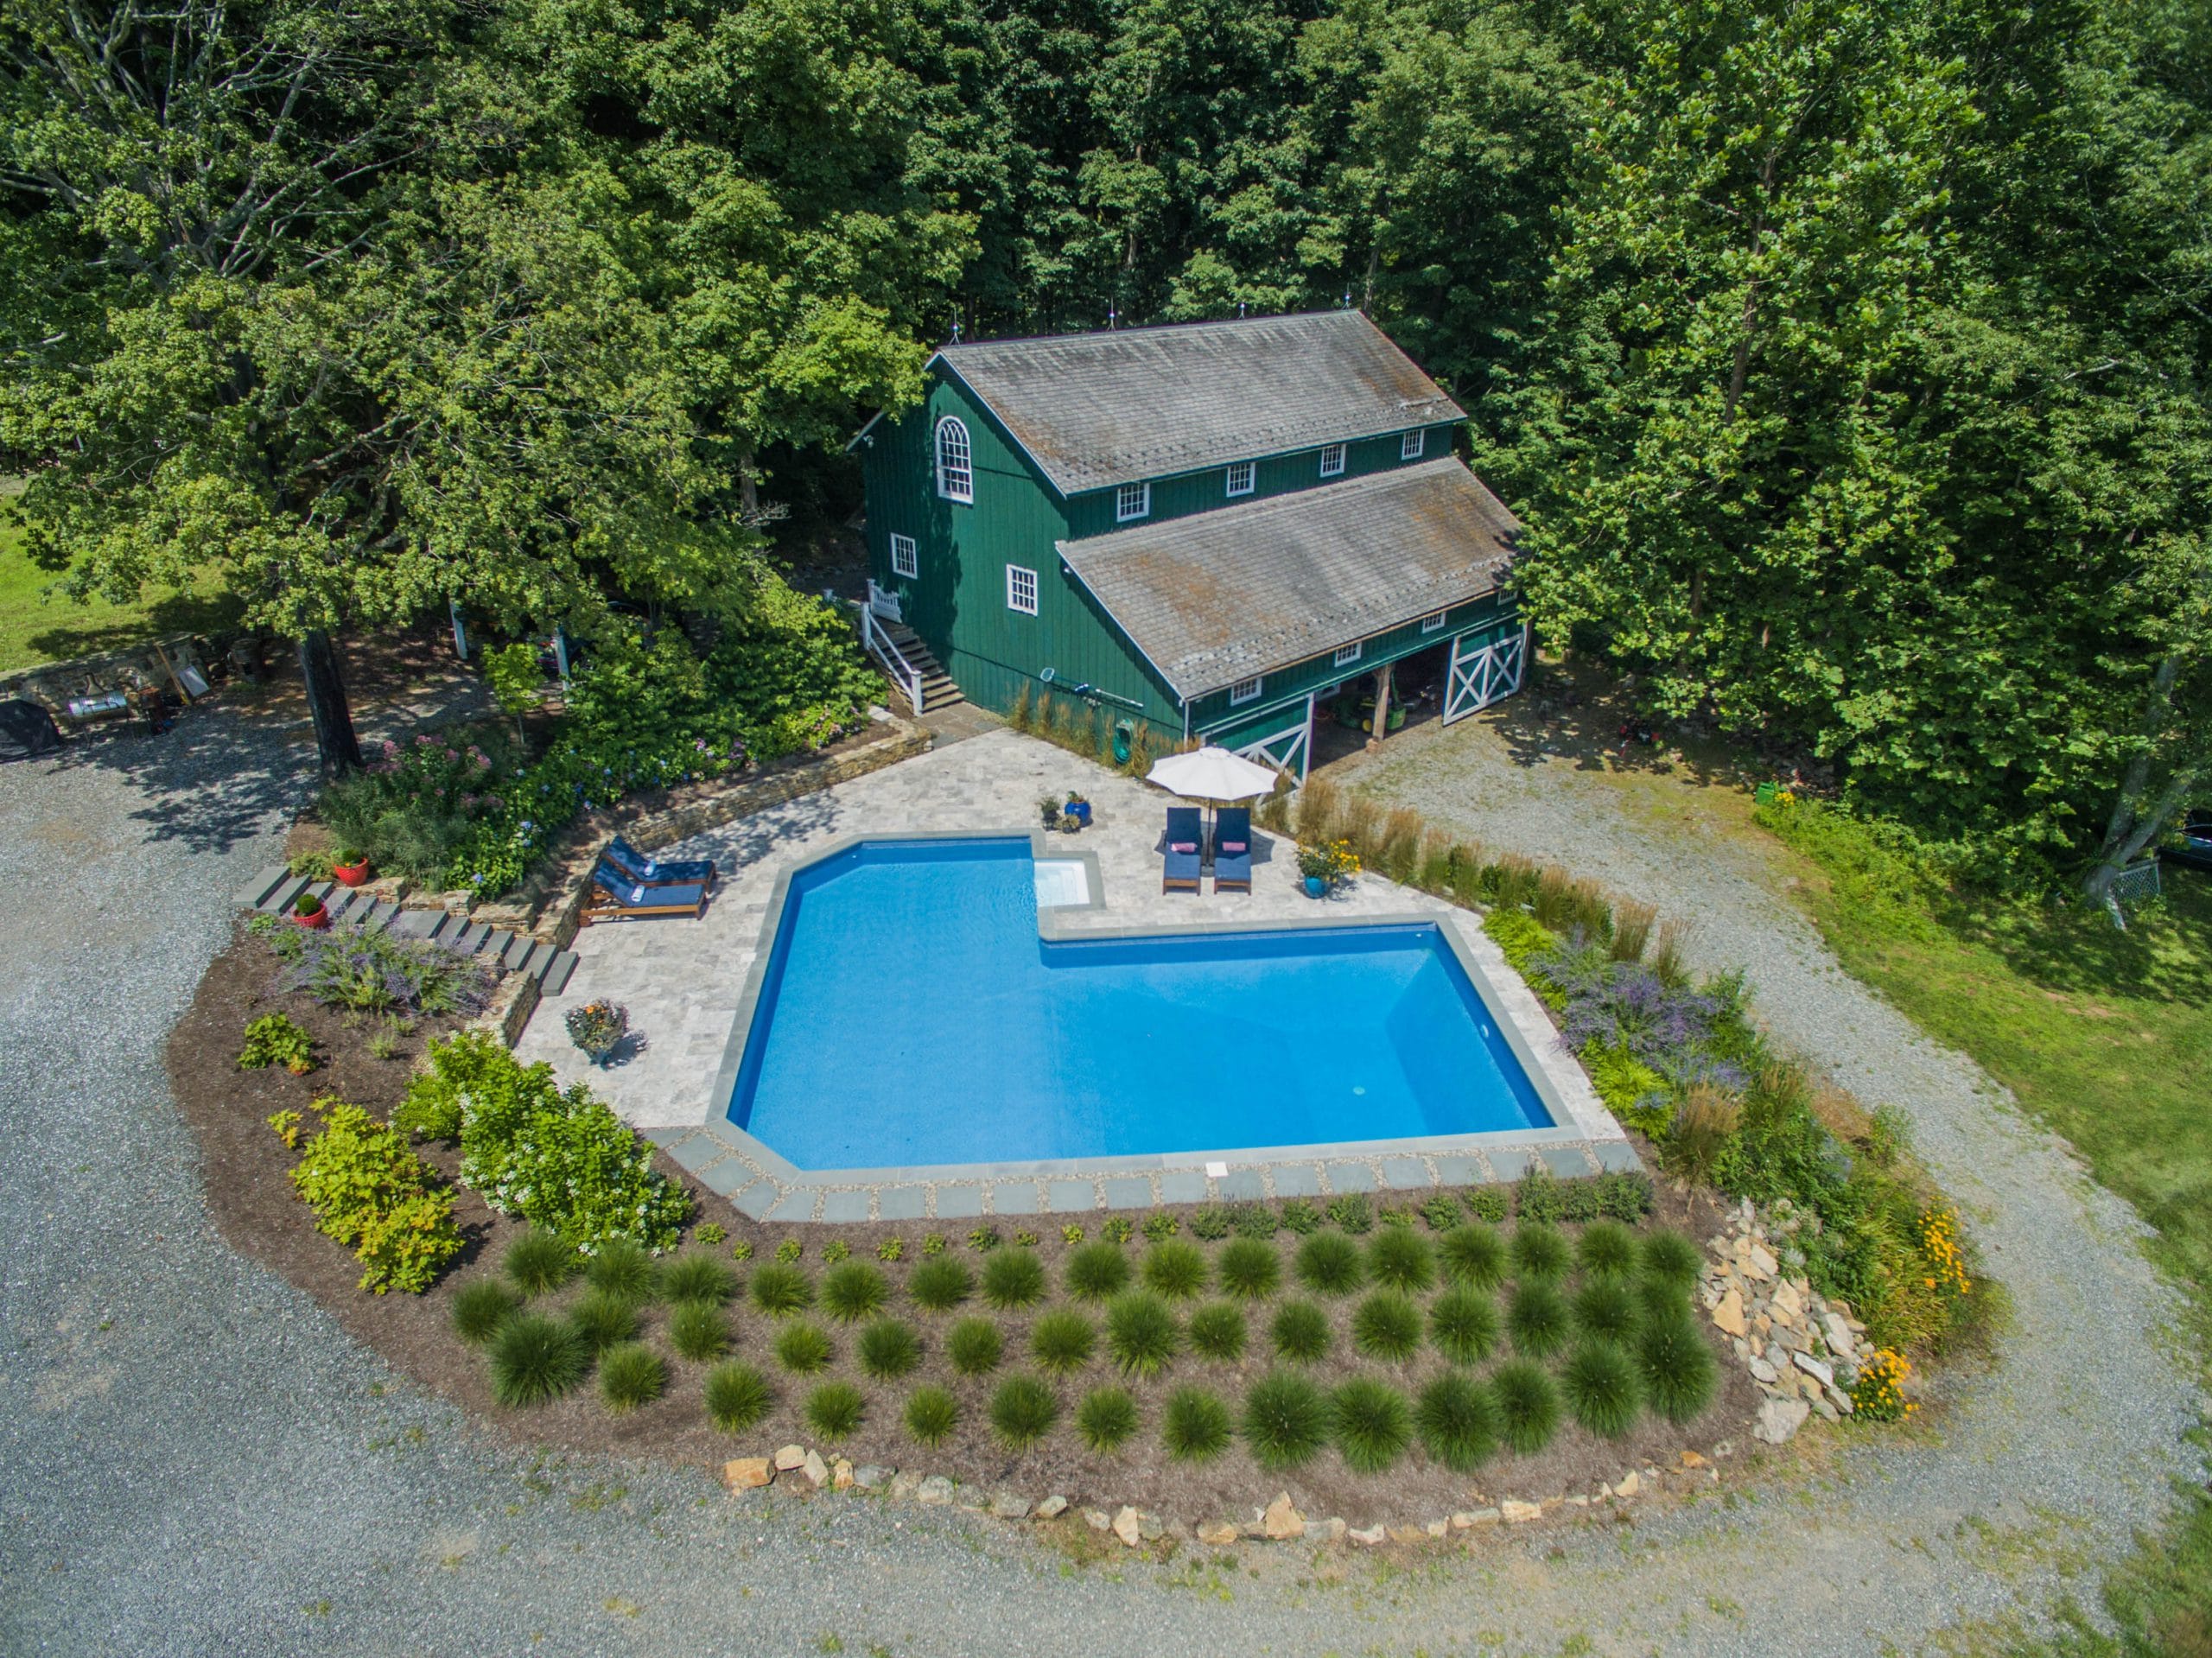 60 69 Philhower Road -- aerial of barn and pool BZ